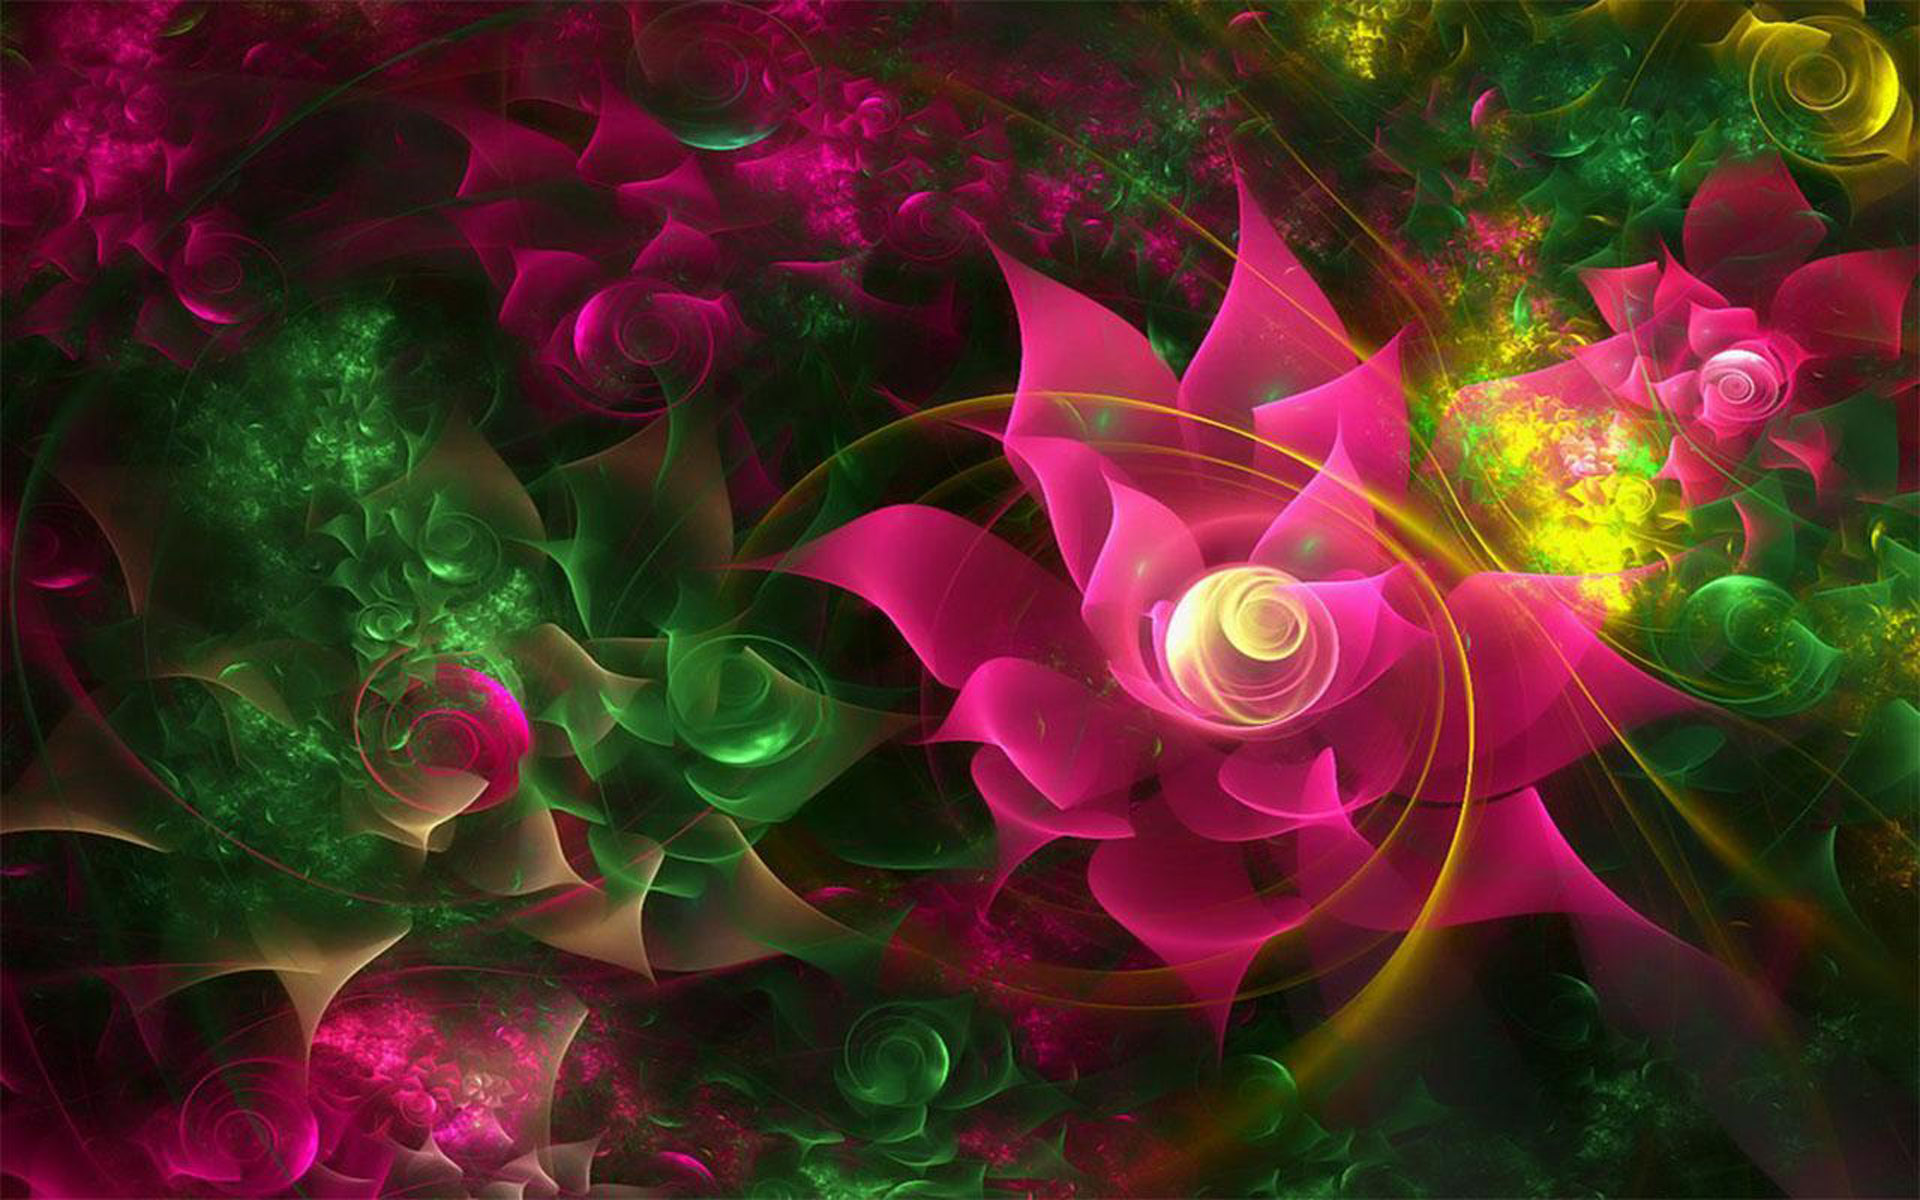 Flowers Fantasy Dreams Beautiful Abstract 3d Wallpapers Hd ...